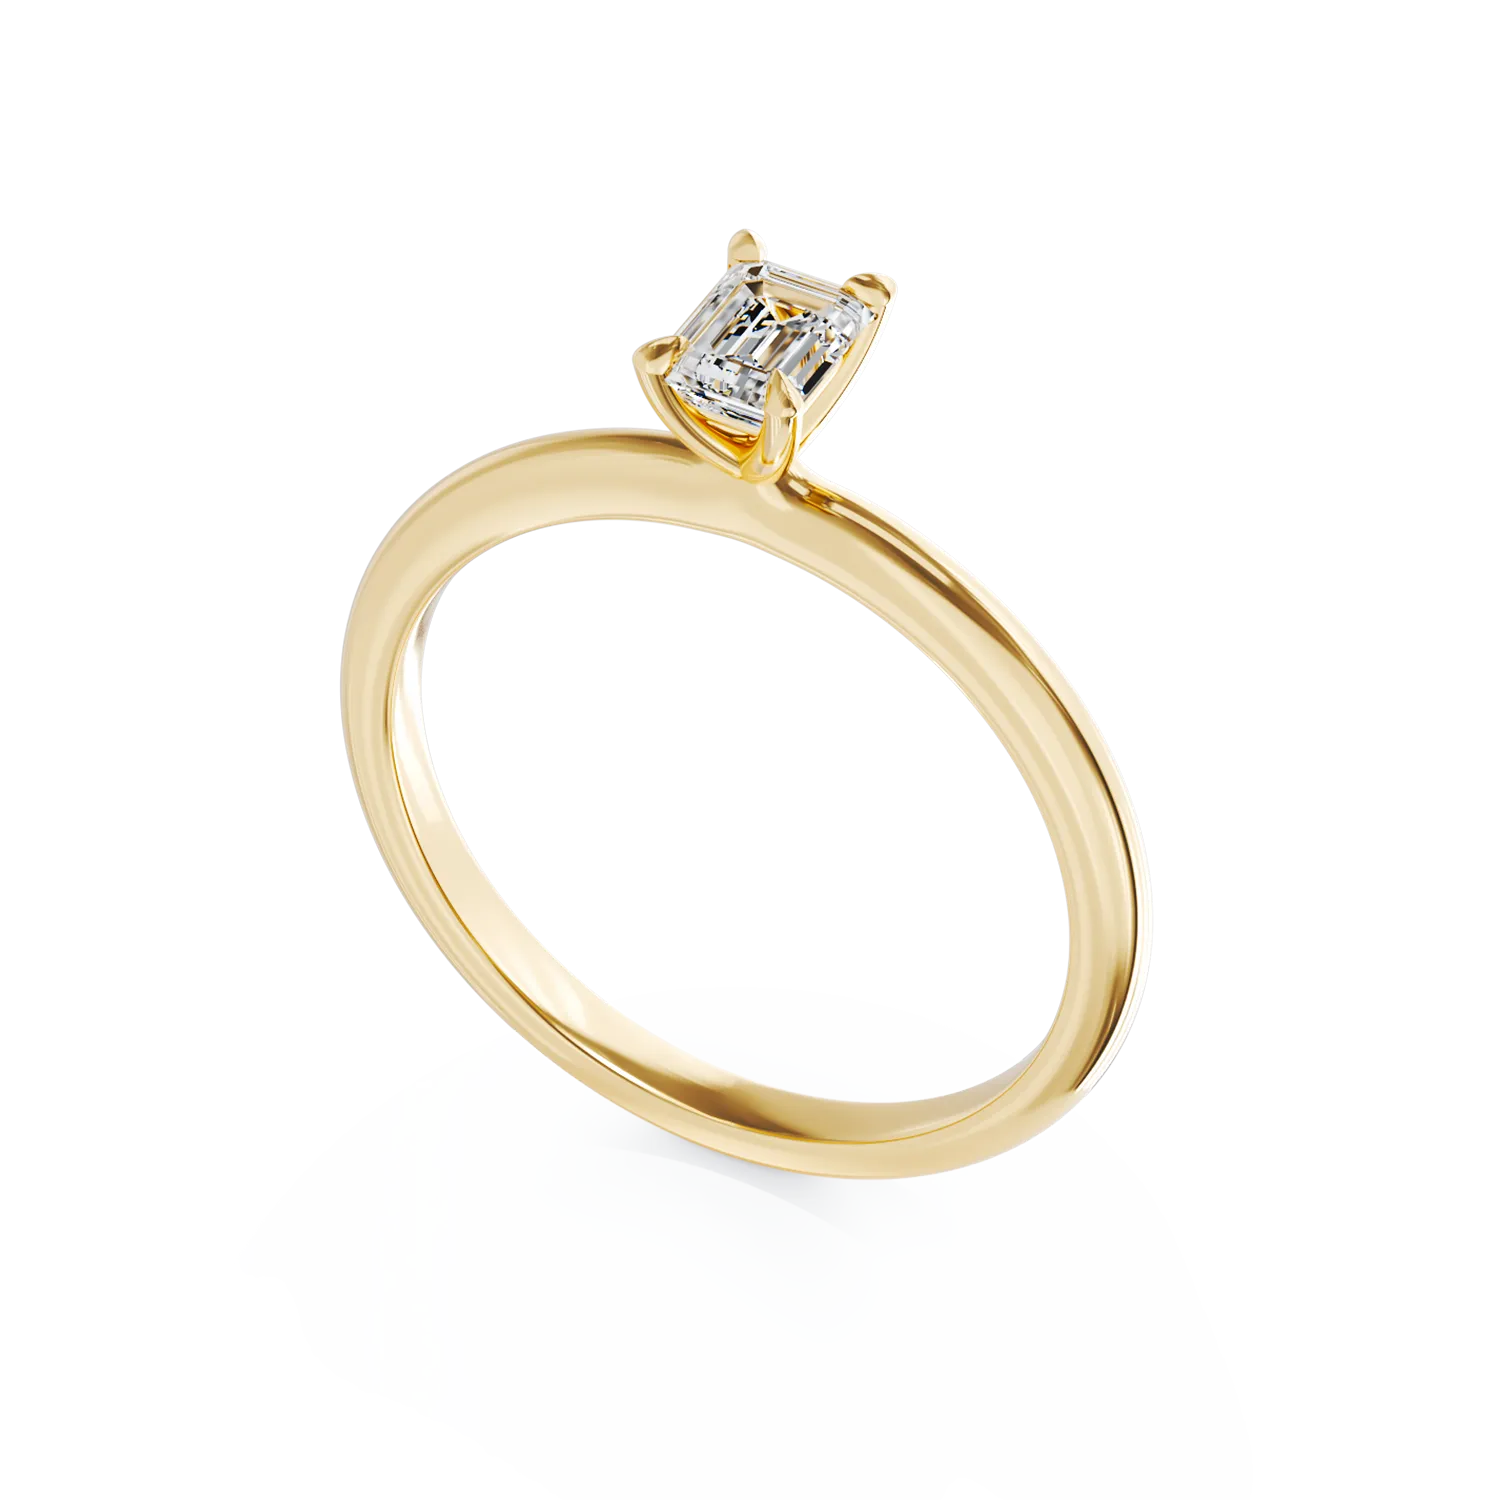 18k yellow gold engagement ring with 0.3ct Solitaire diamond